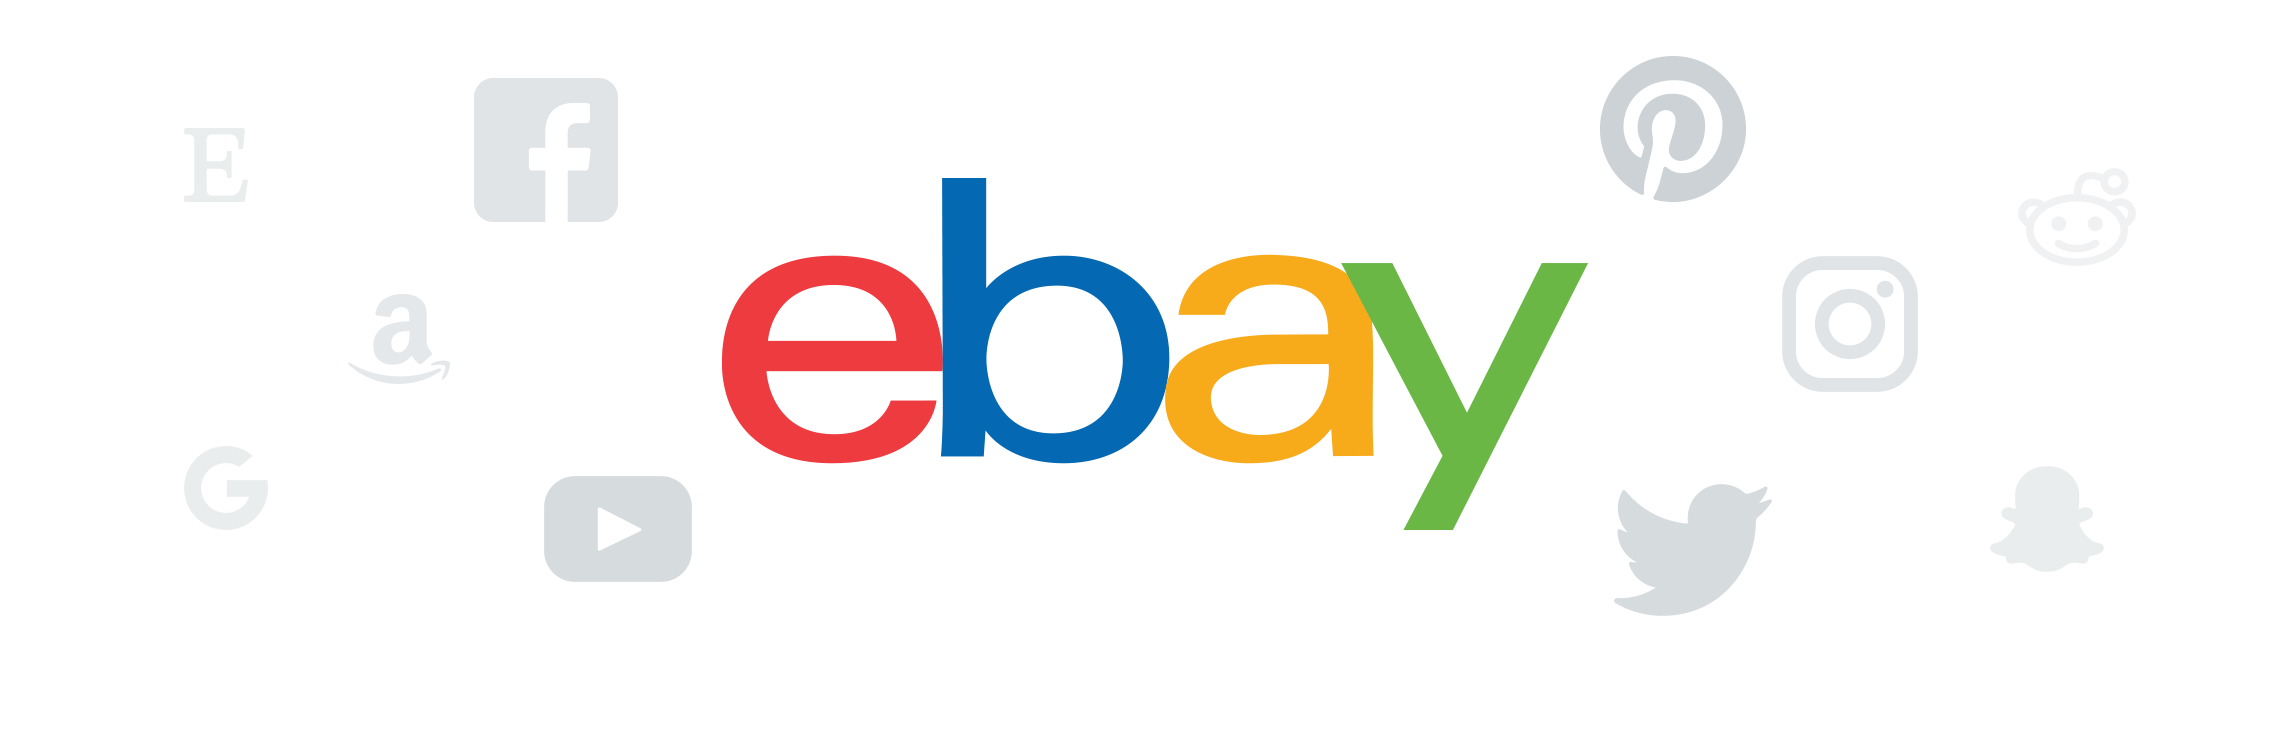 Why we need to integrate Ebay with our eCommerce site?